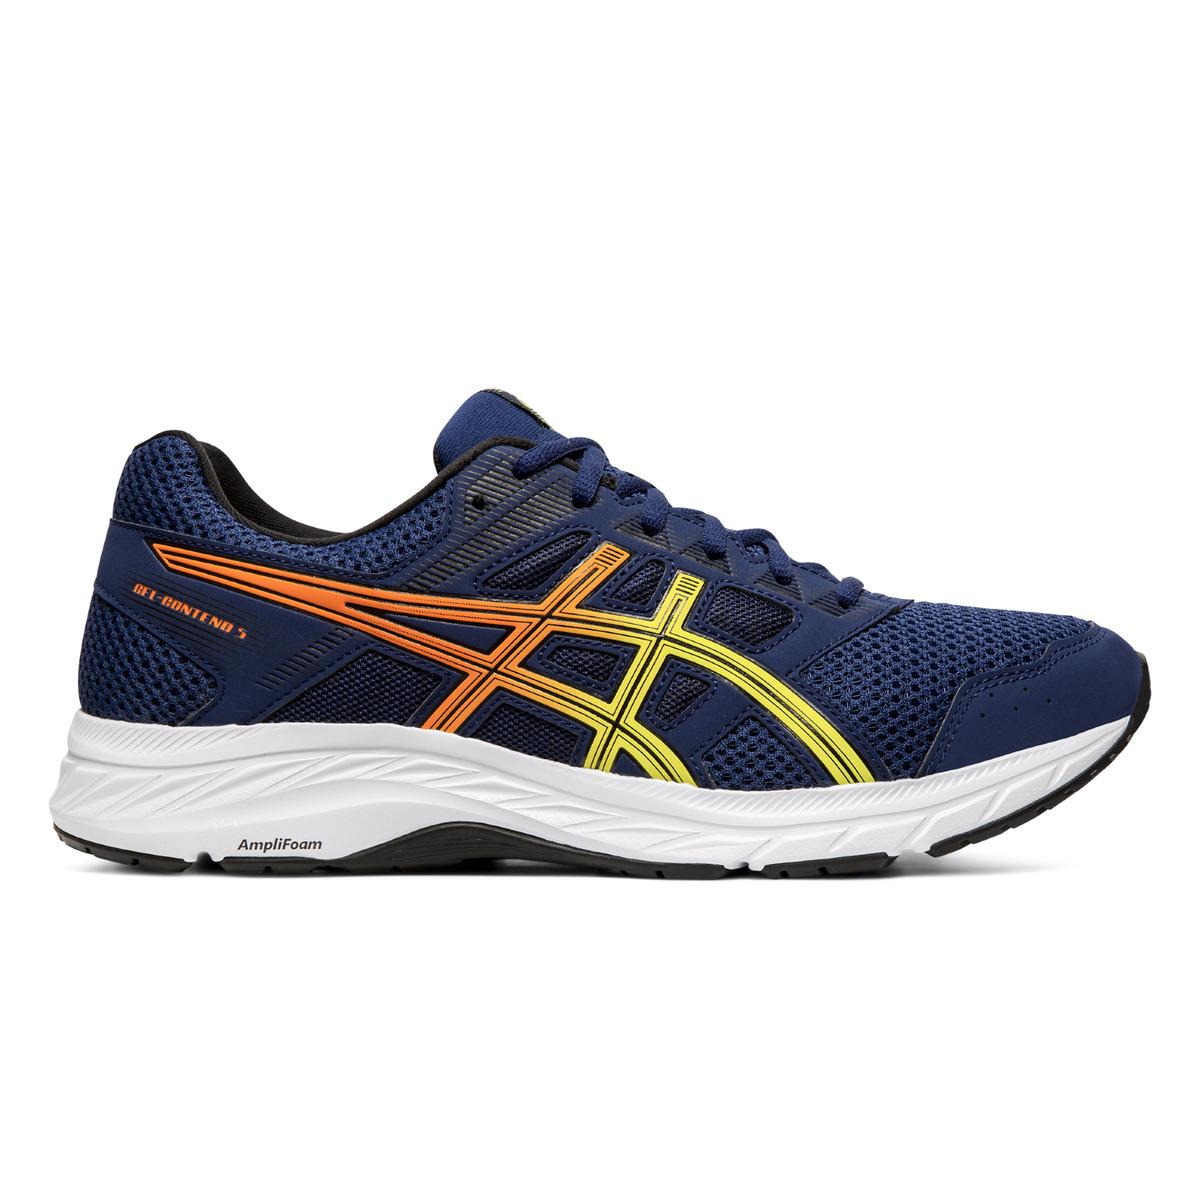 Asics Gel-contend 5 Running Shoes in Navy Blue (Blue) for Men - Lyst